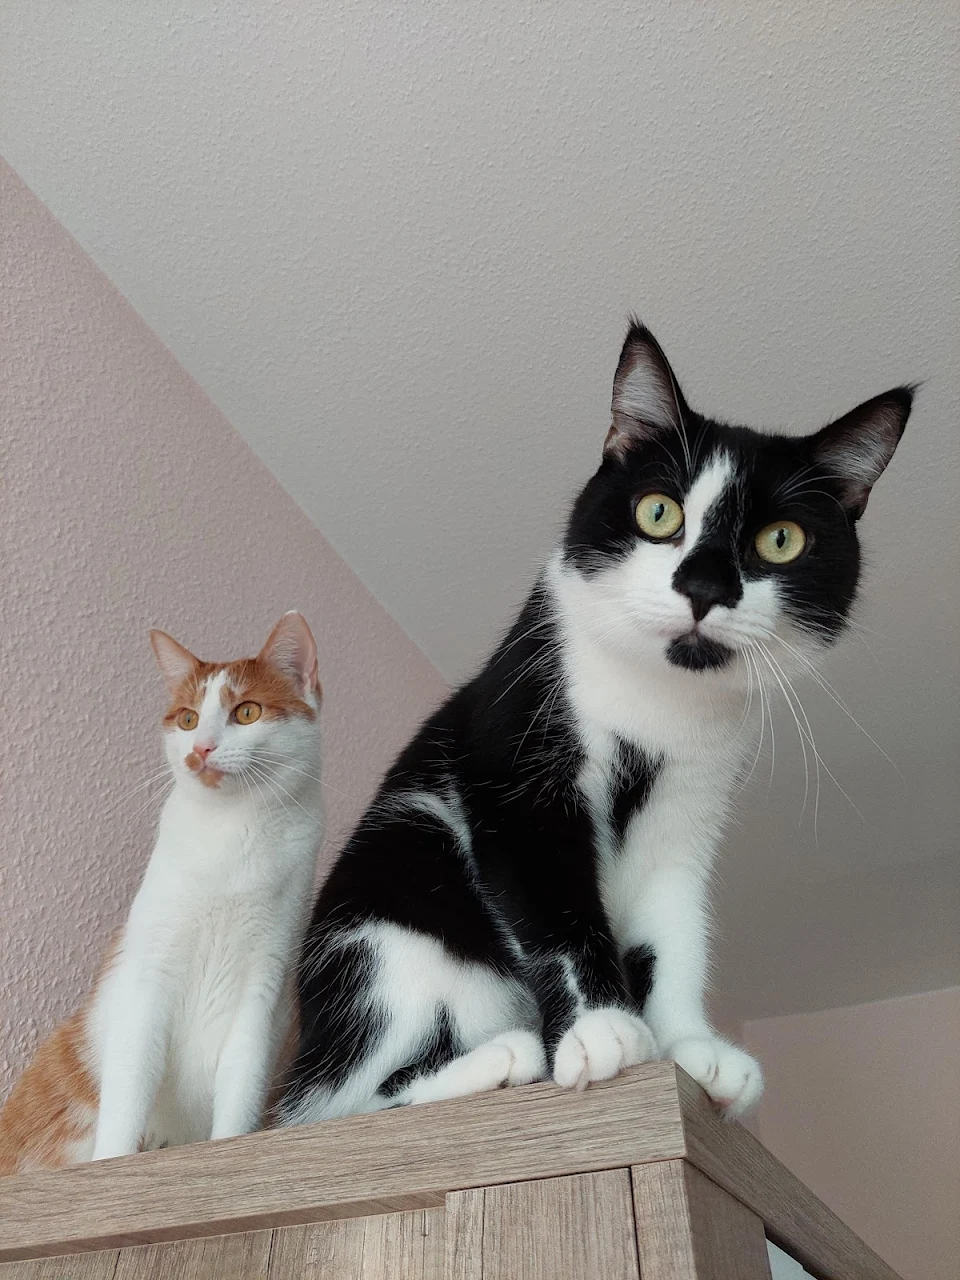 My two cats first attempt at posing for a 90's hiphop album cover (oc)